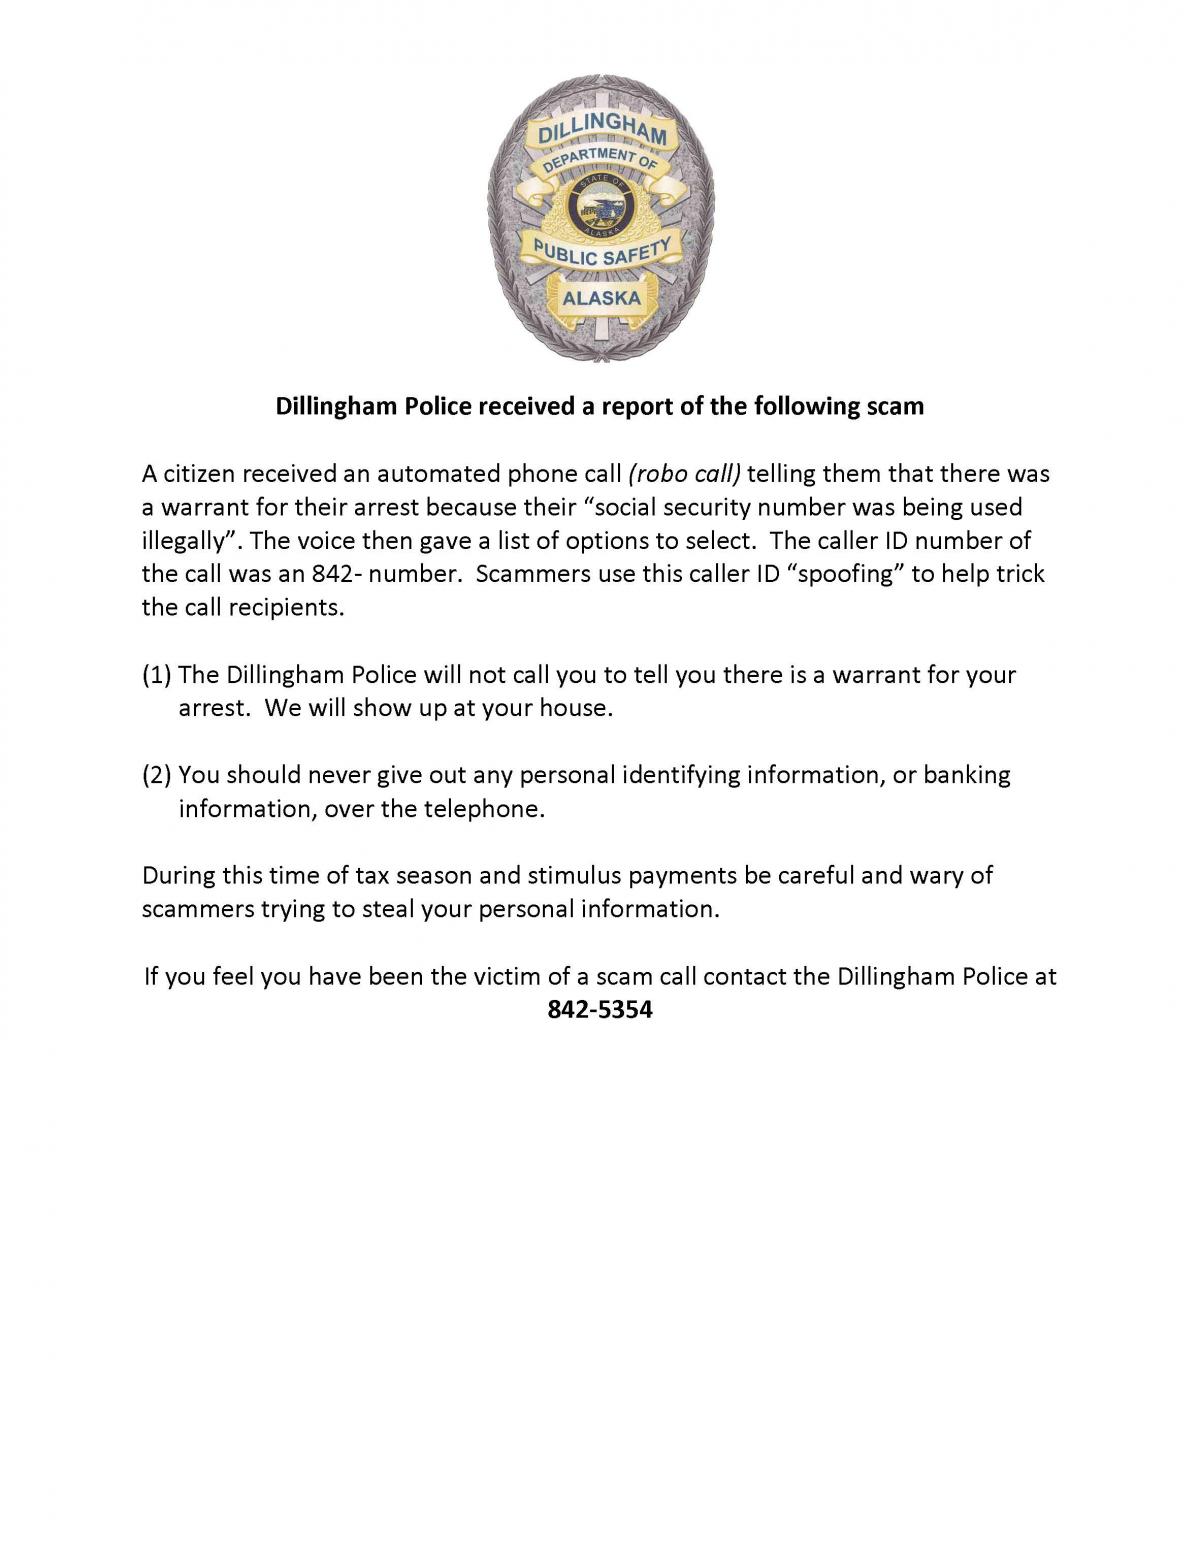 Contact the Dillingham Police Department if you feel you've been the victim of a scam